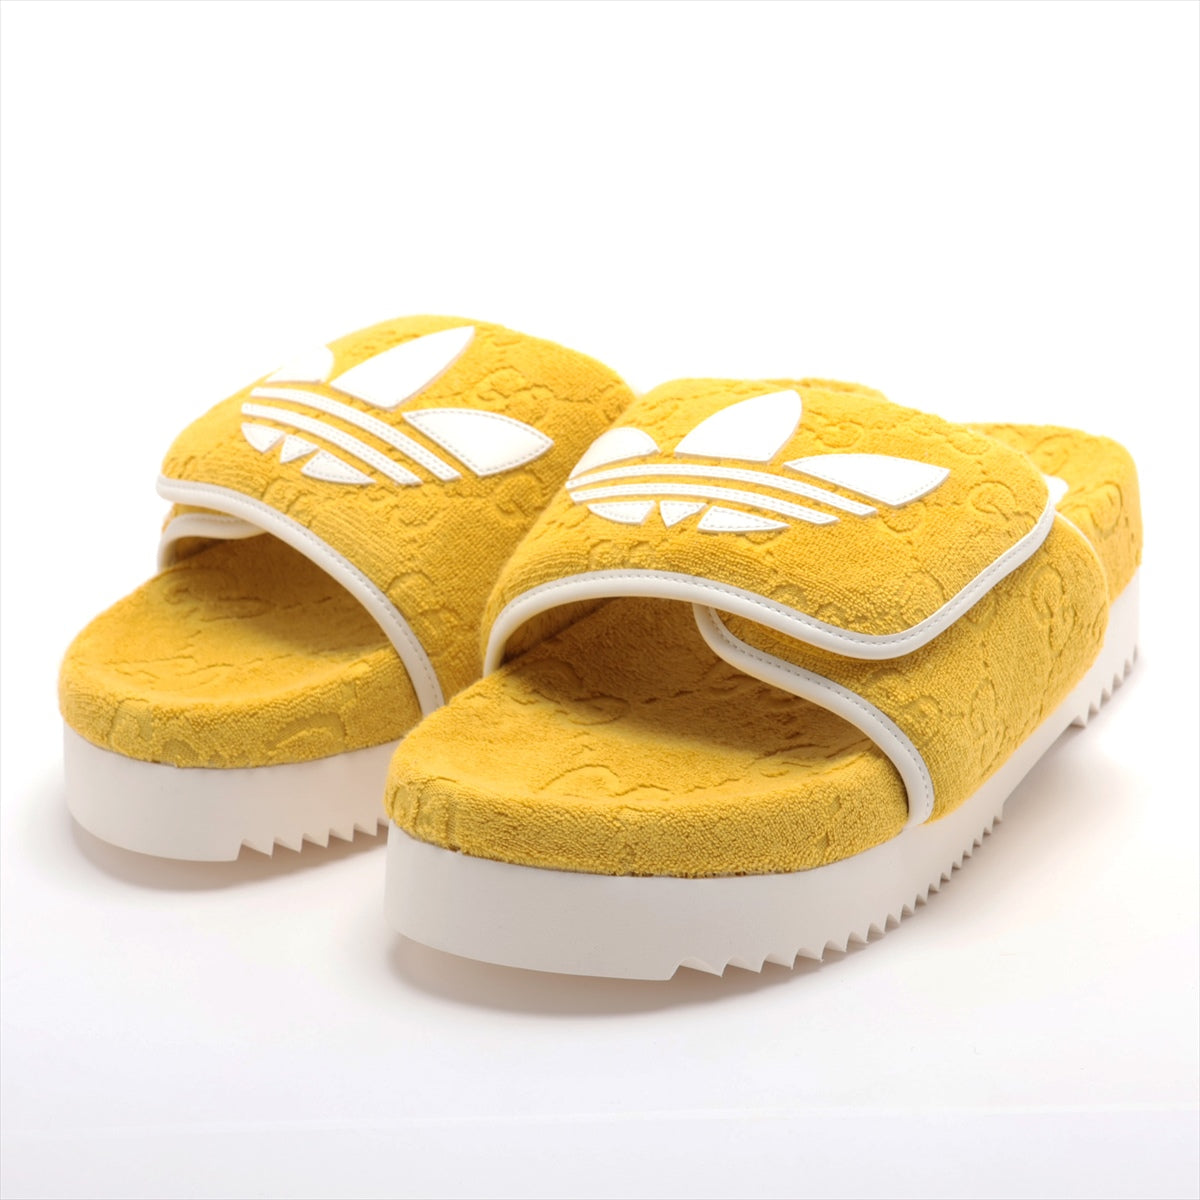 Gucci x Adidas GG Supreme Cotton & Peather Sandals 10 Men's White x yellow Box There is a storage bag